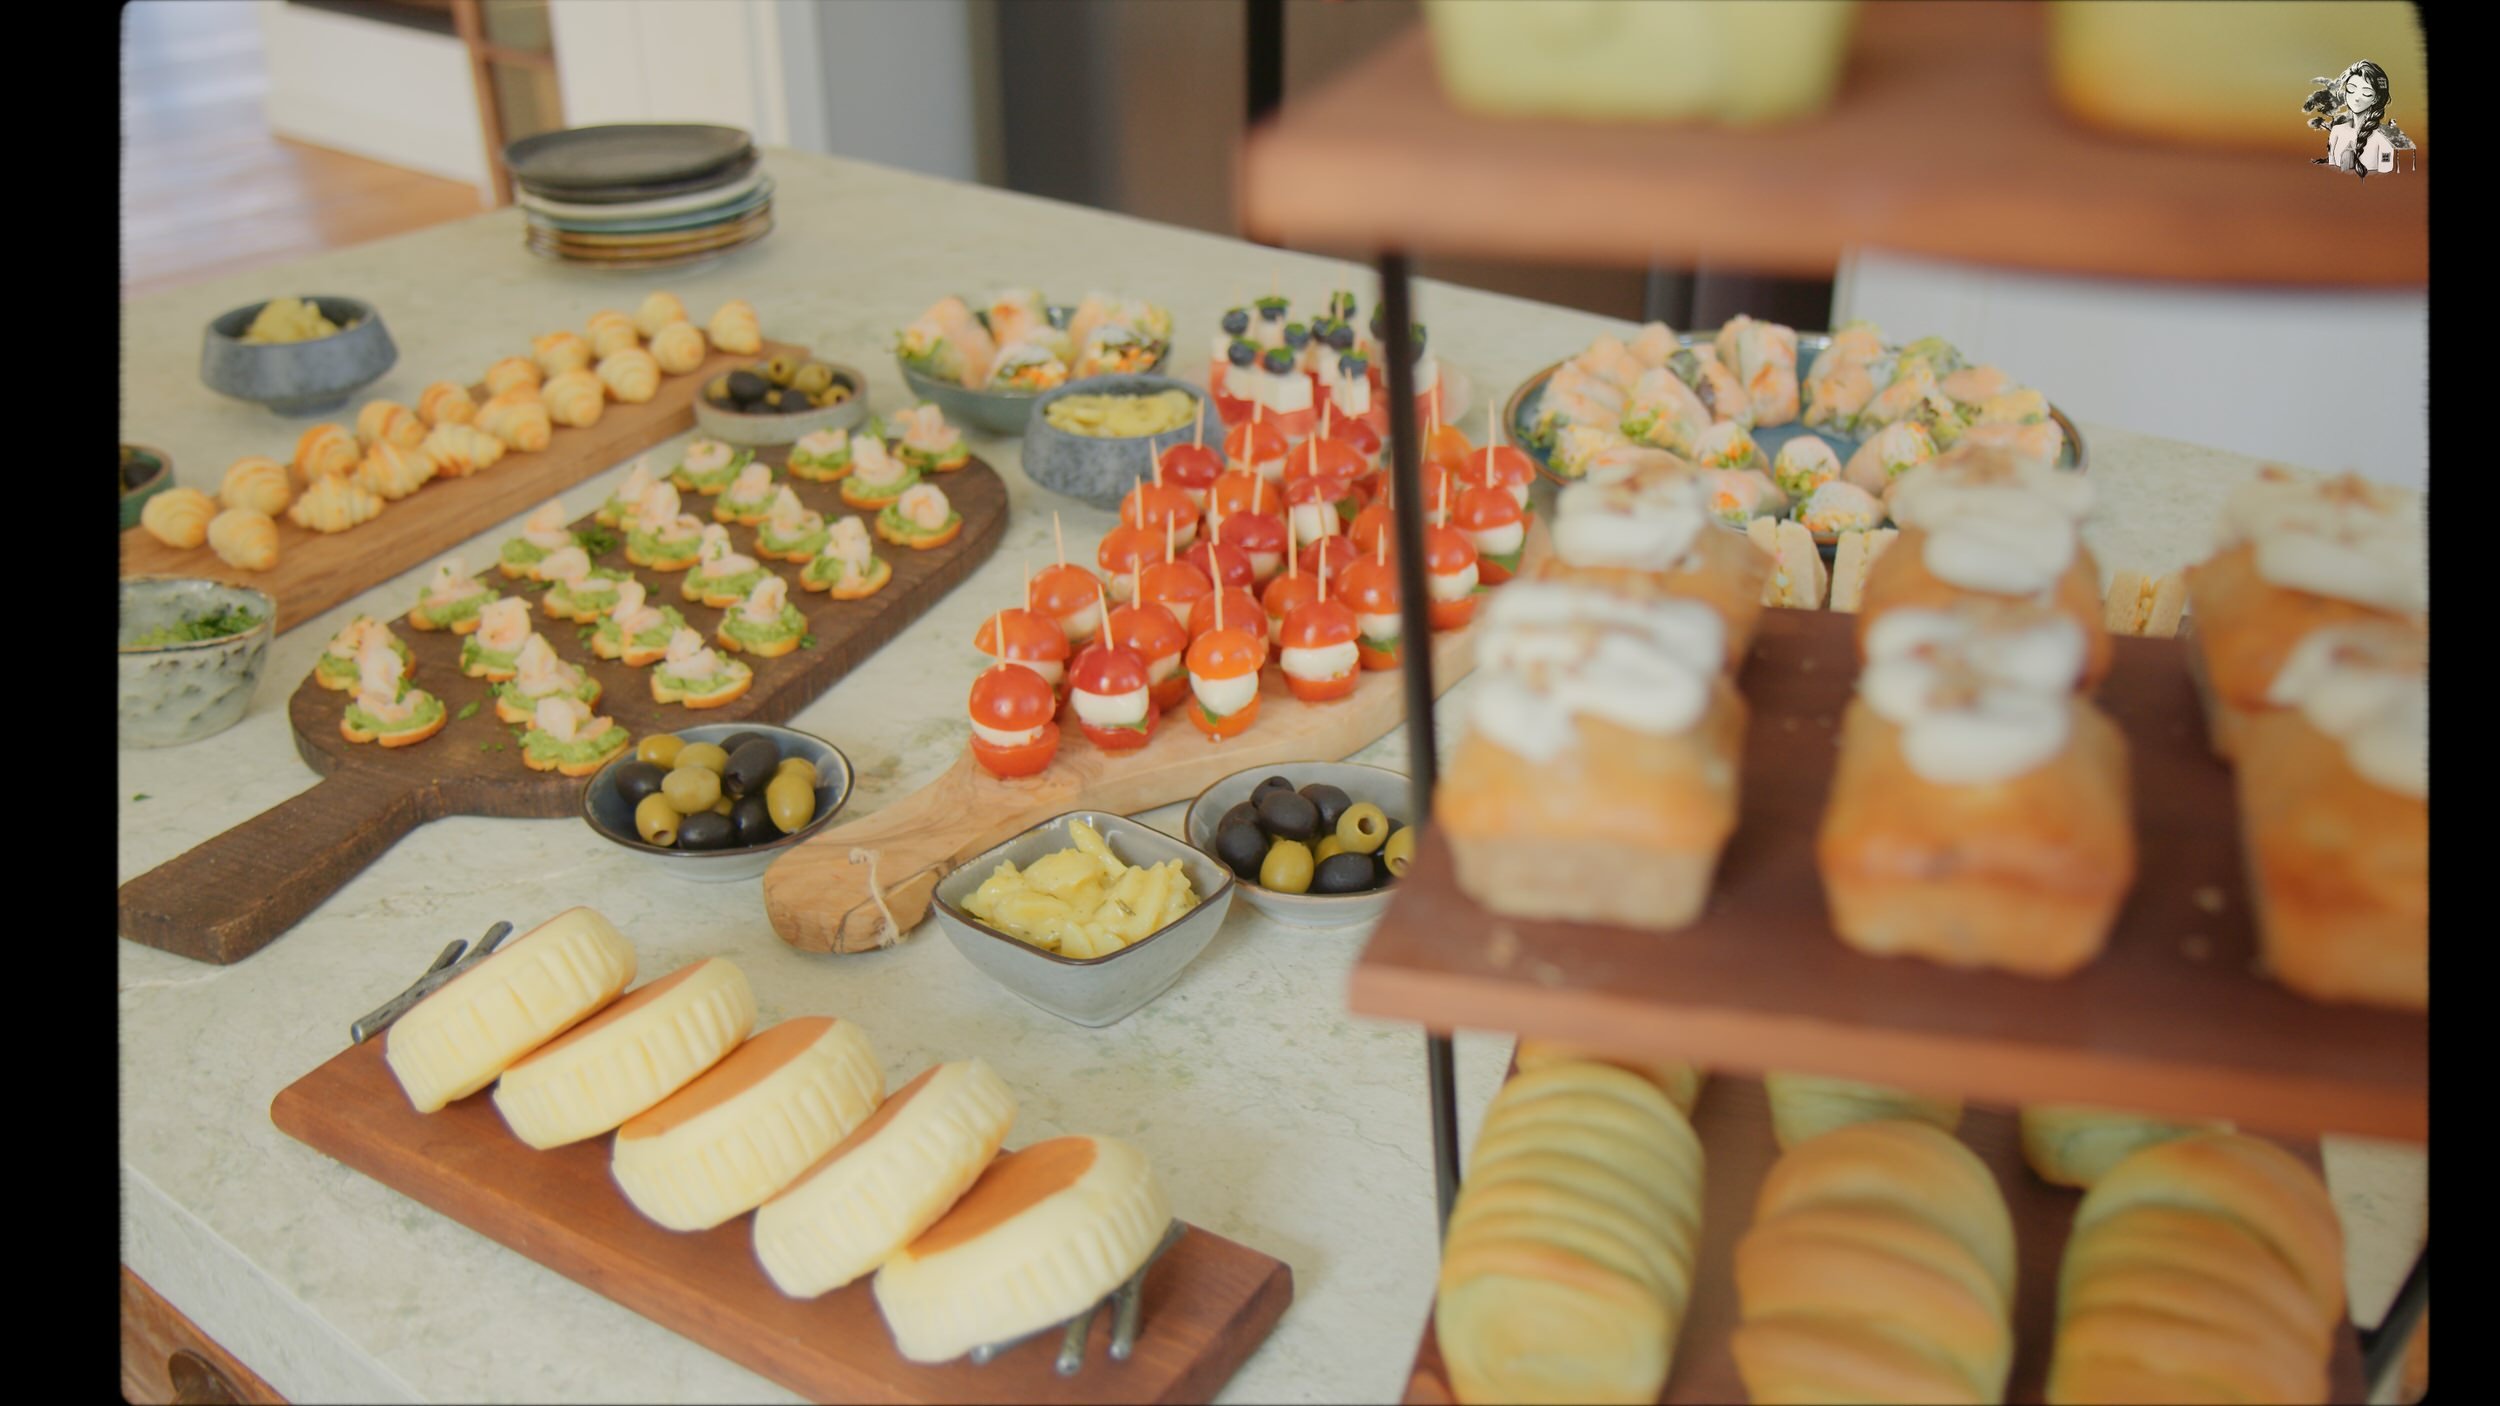 Small Bites Brunch Buffet Ideas for your next party - Her86m2 _1.247.1.jpg